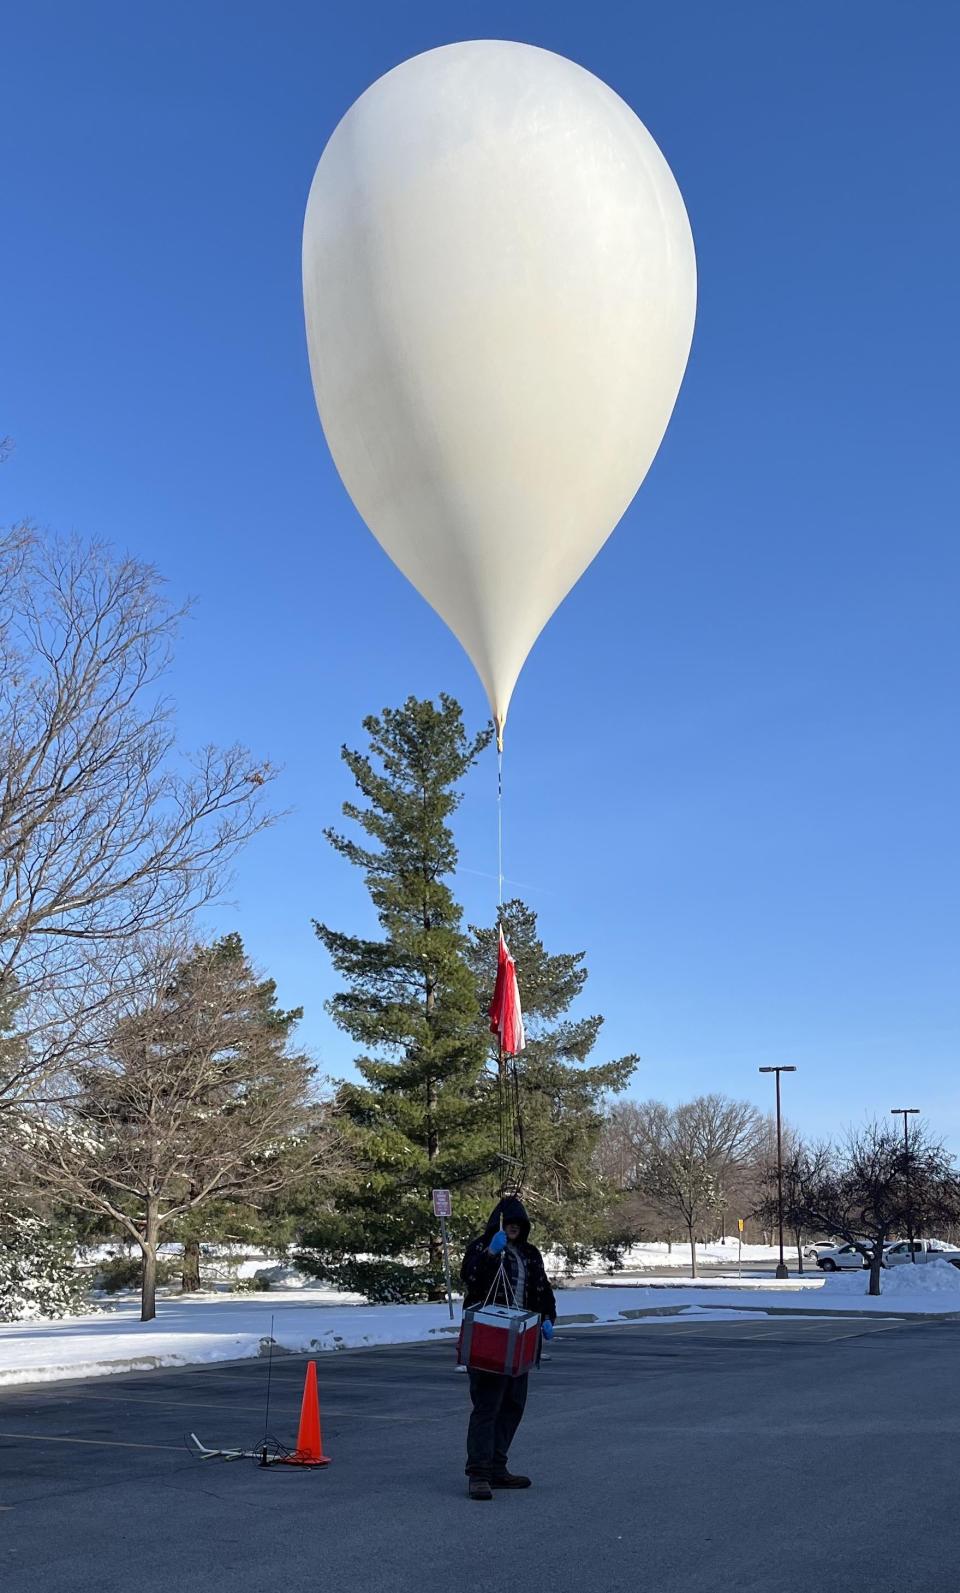 Kellan French, a senior in aerospace engineering, prepares to launch the fully inflated balloon.